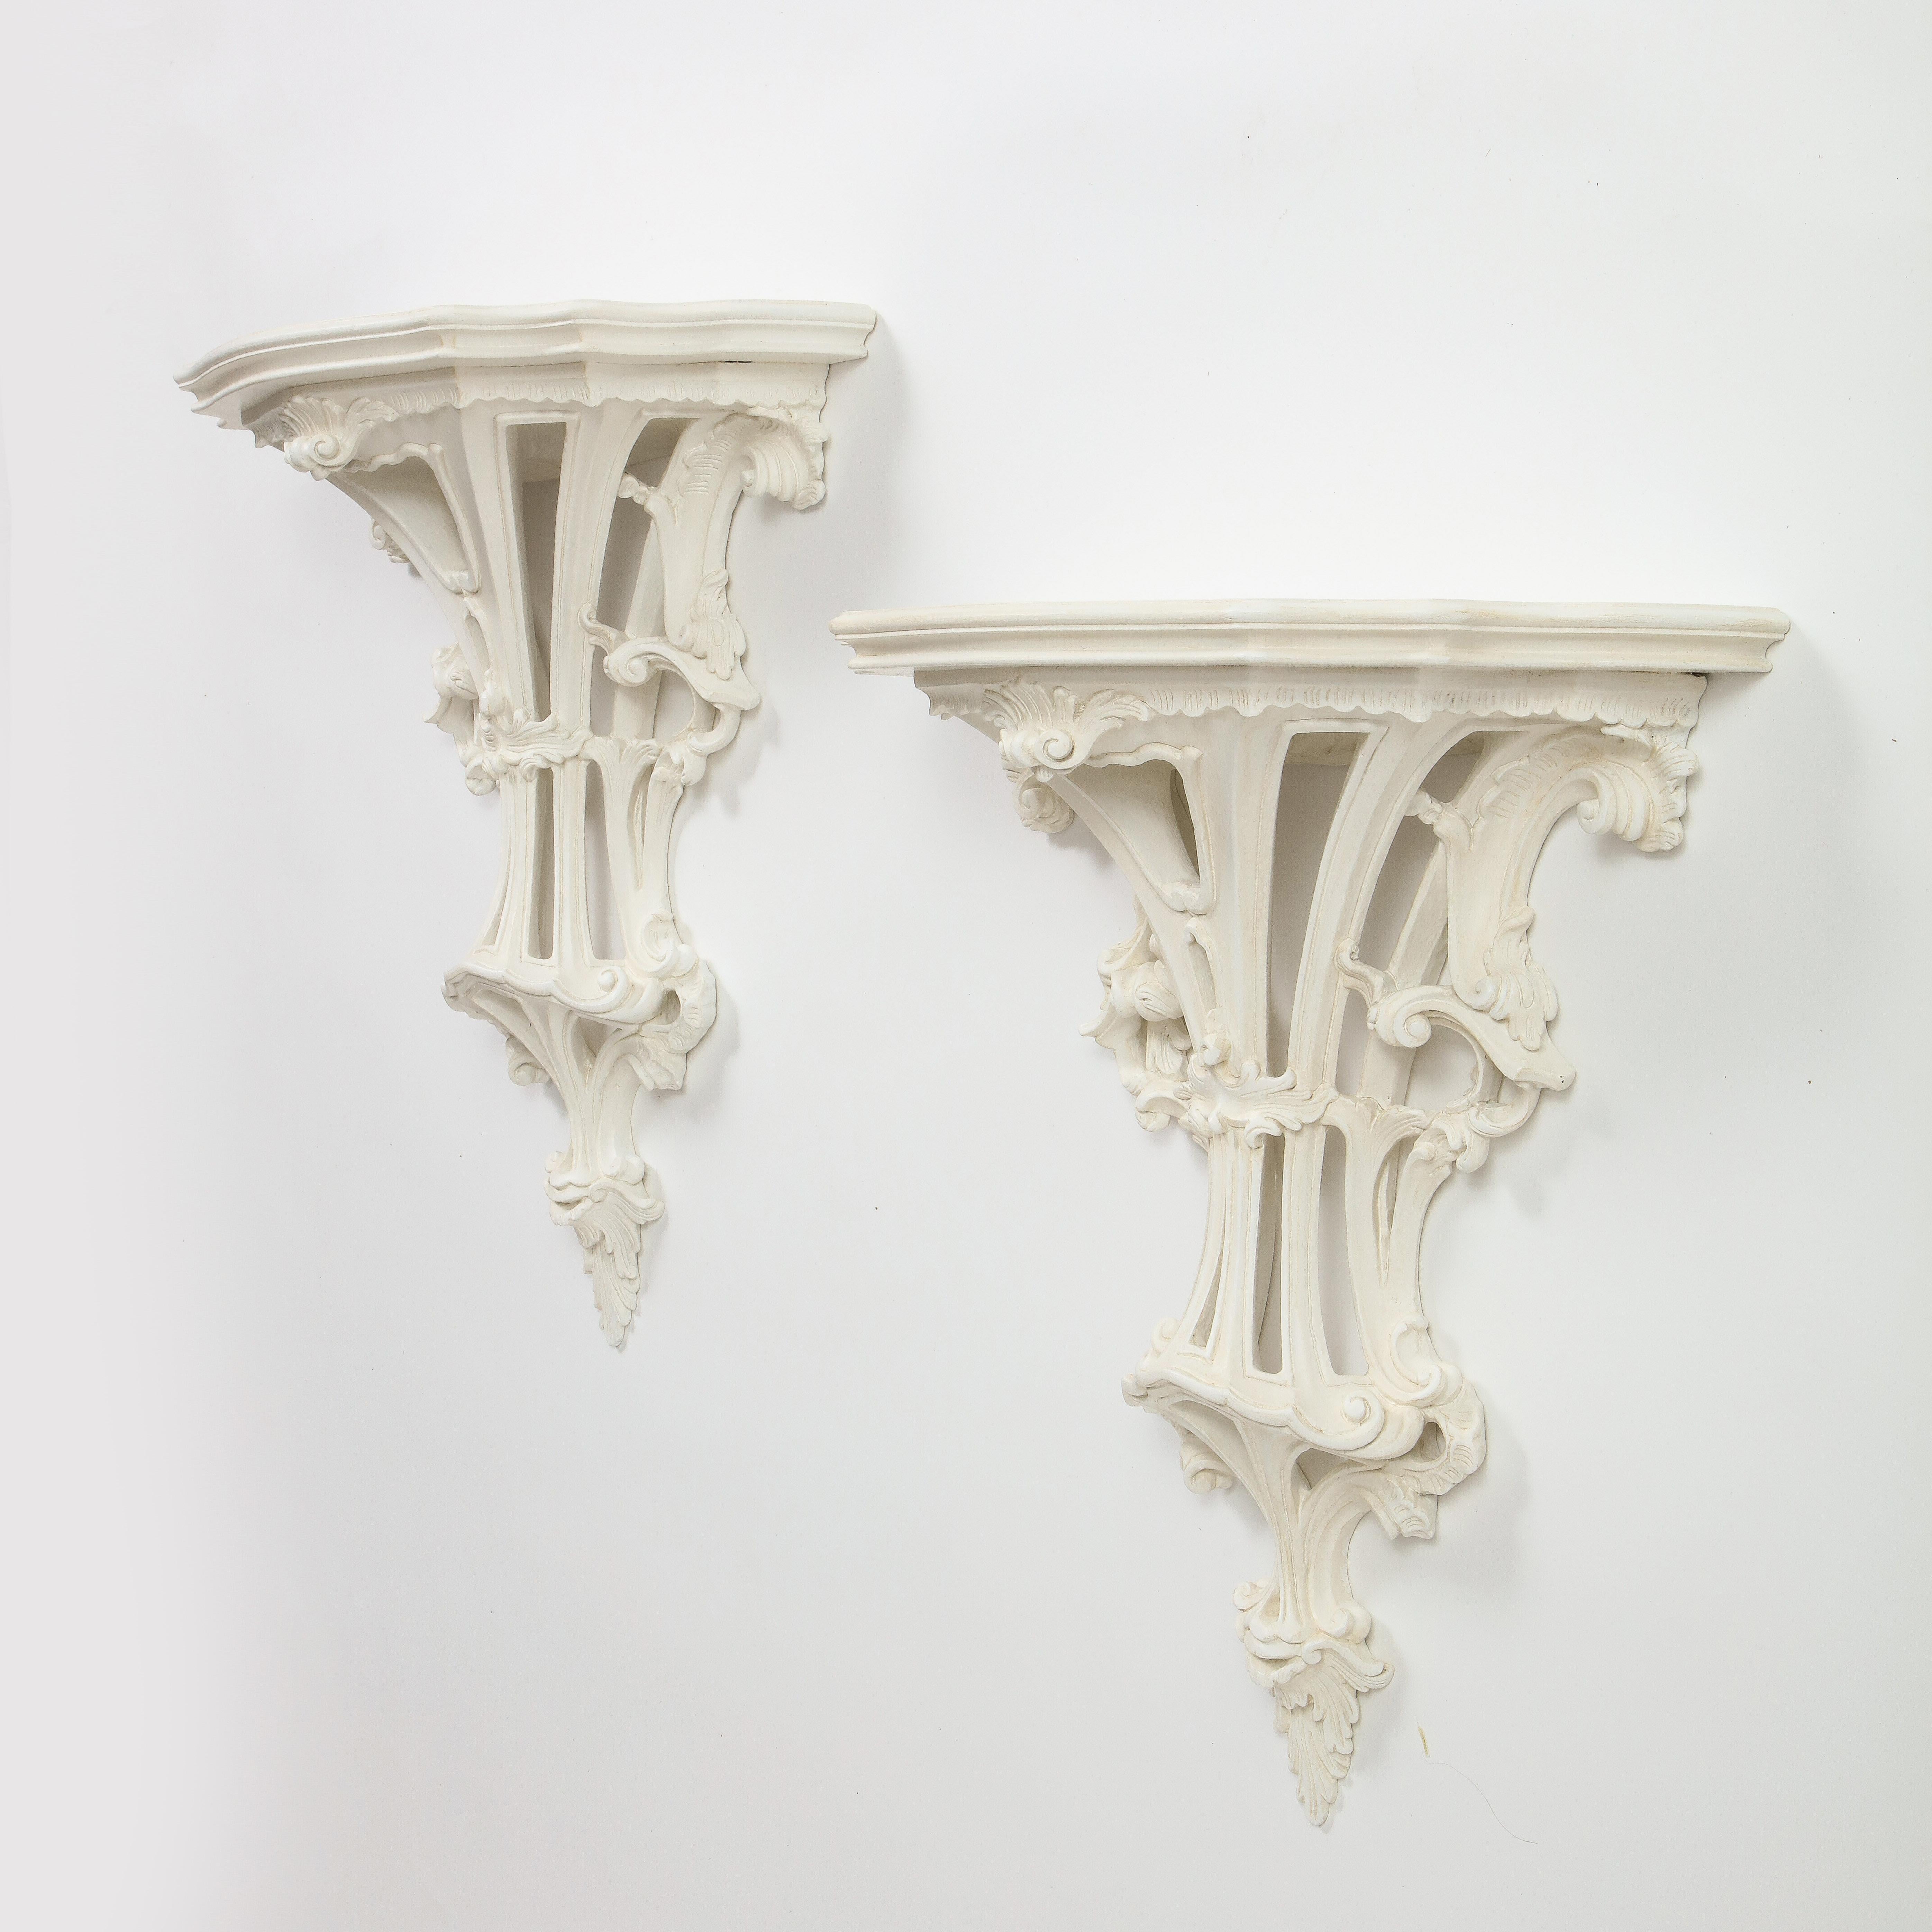 Rococo Revival Pair of Large White-Gessoed Louis XV Style Wall Brackets For Sale